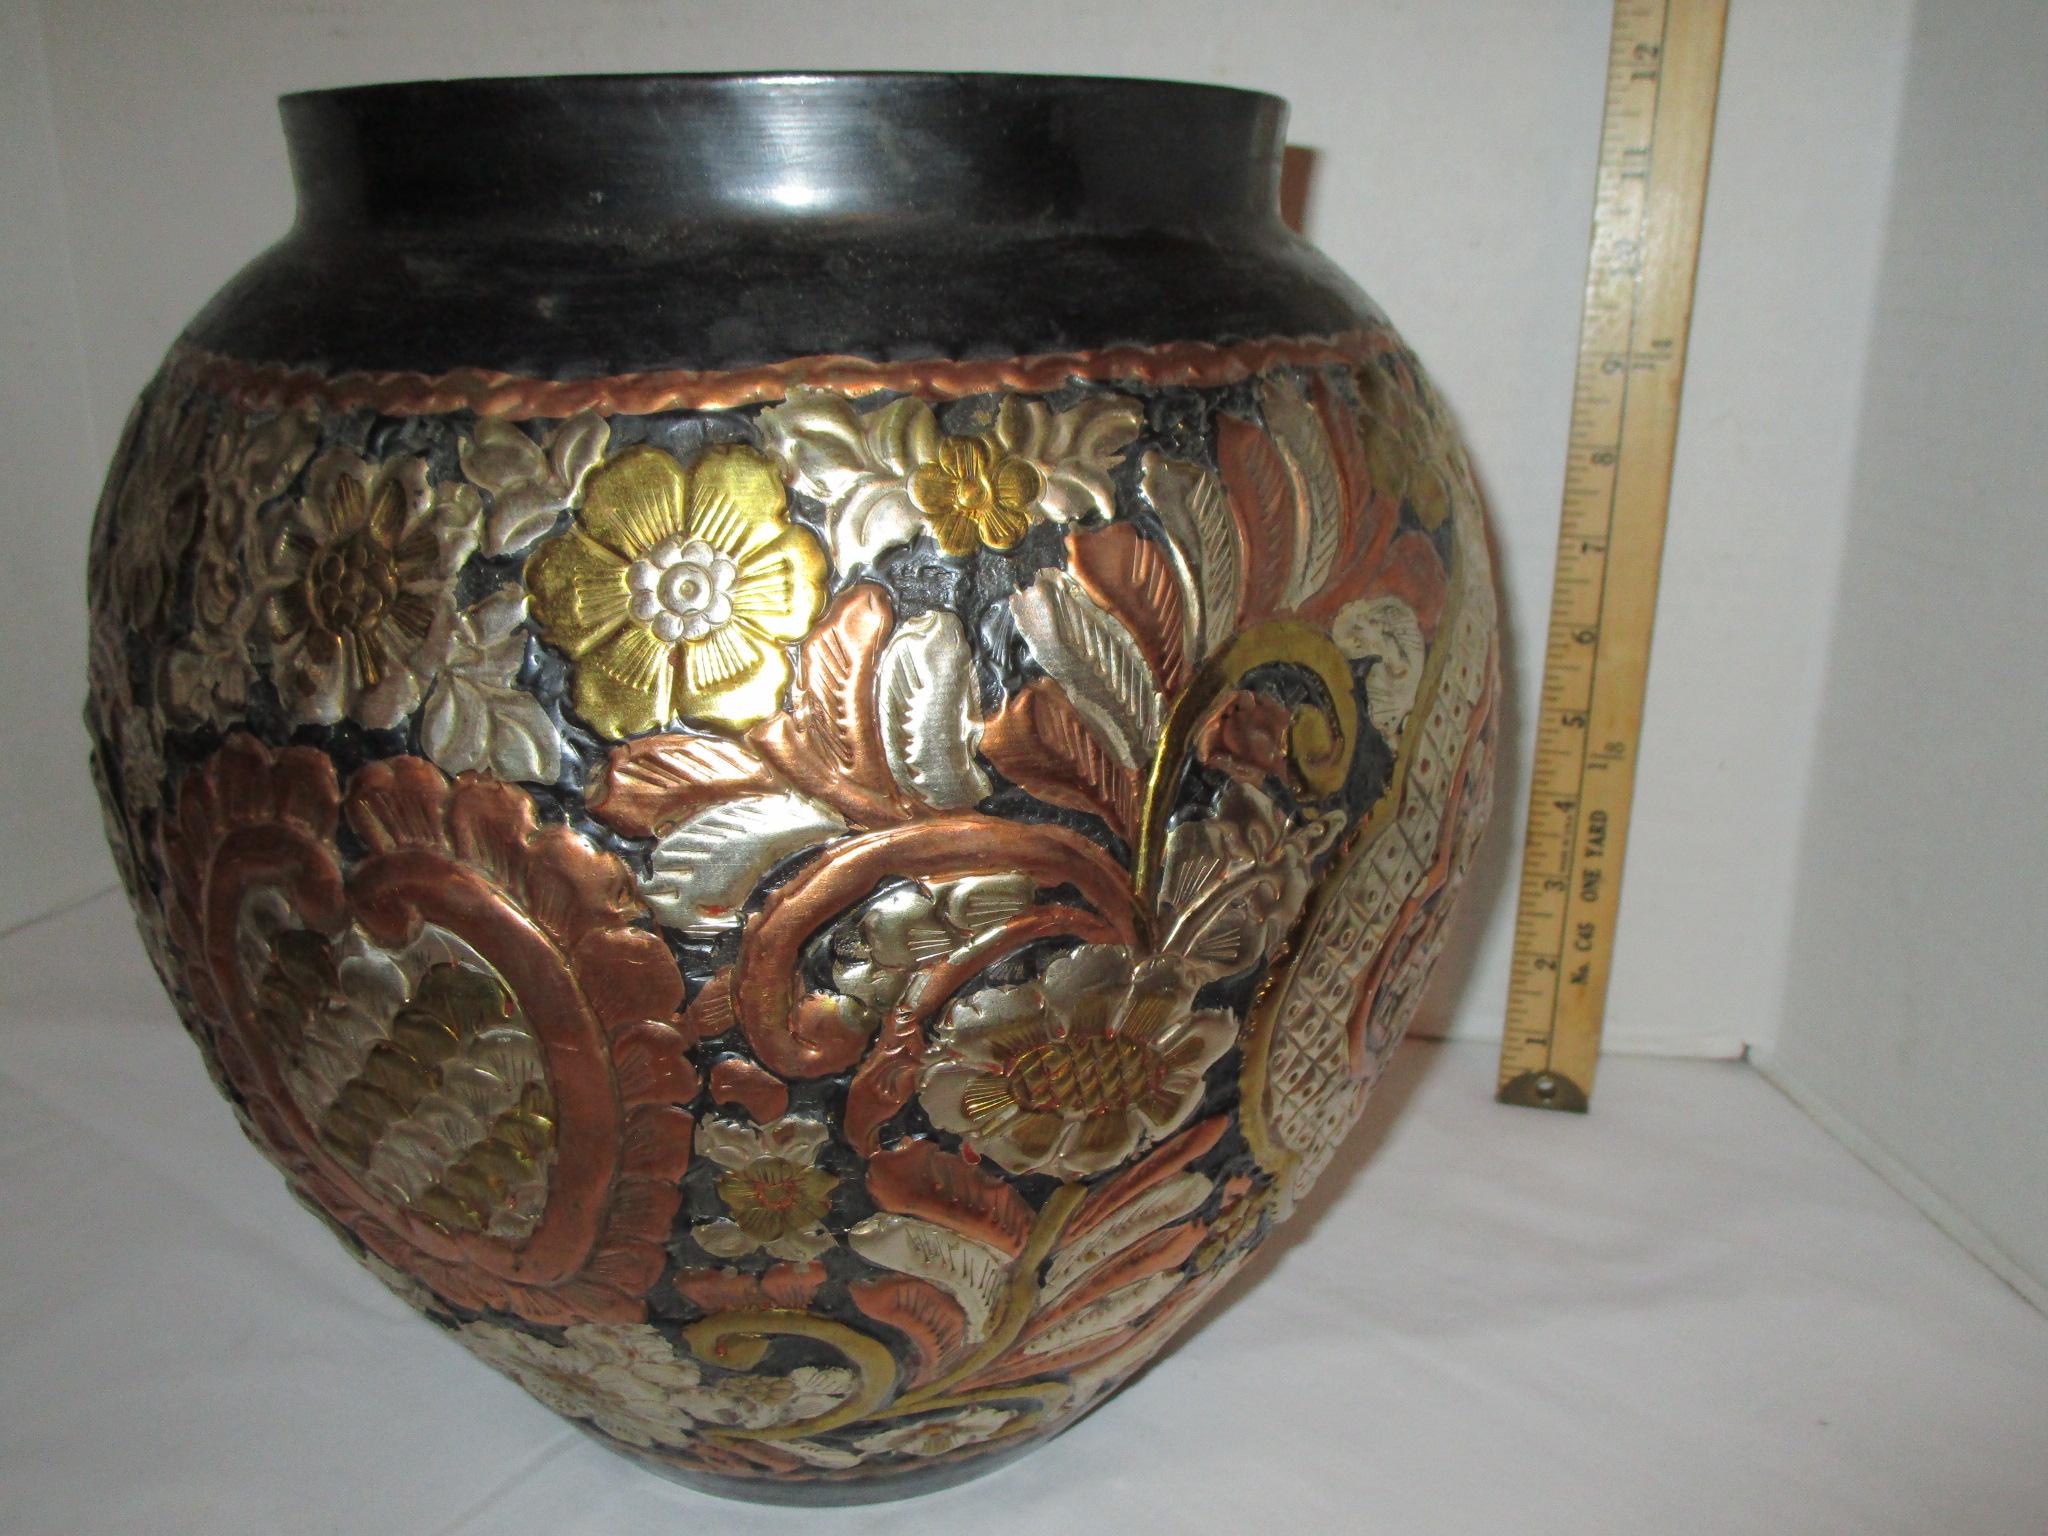 Metal Bulbous Vase w/ Copper & Brass Infused Design - 12" Tall